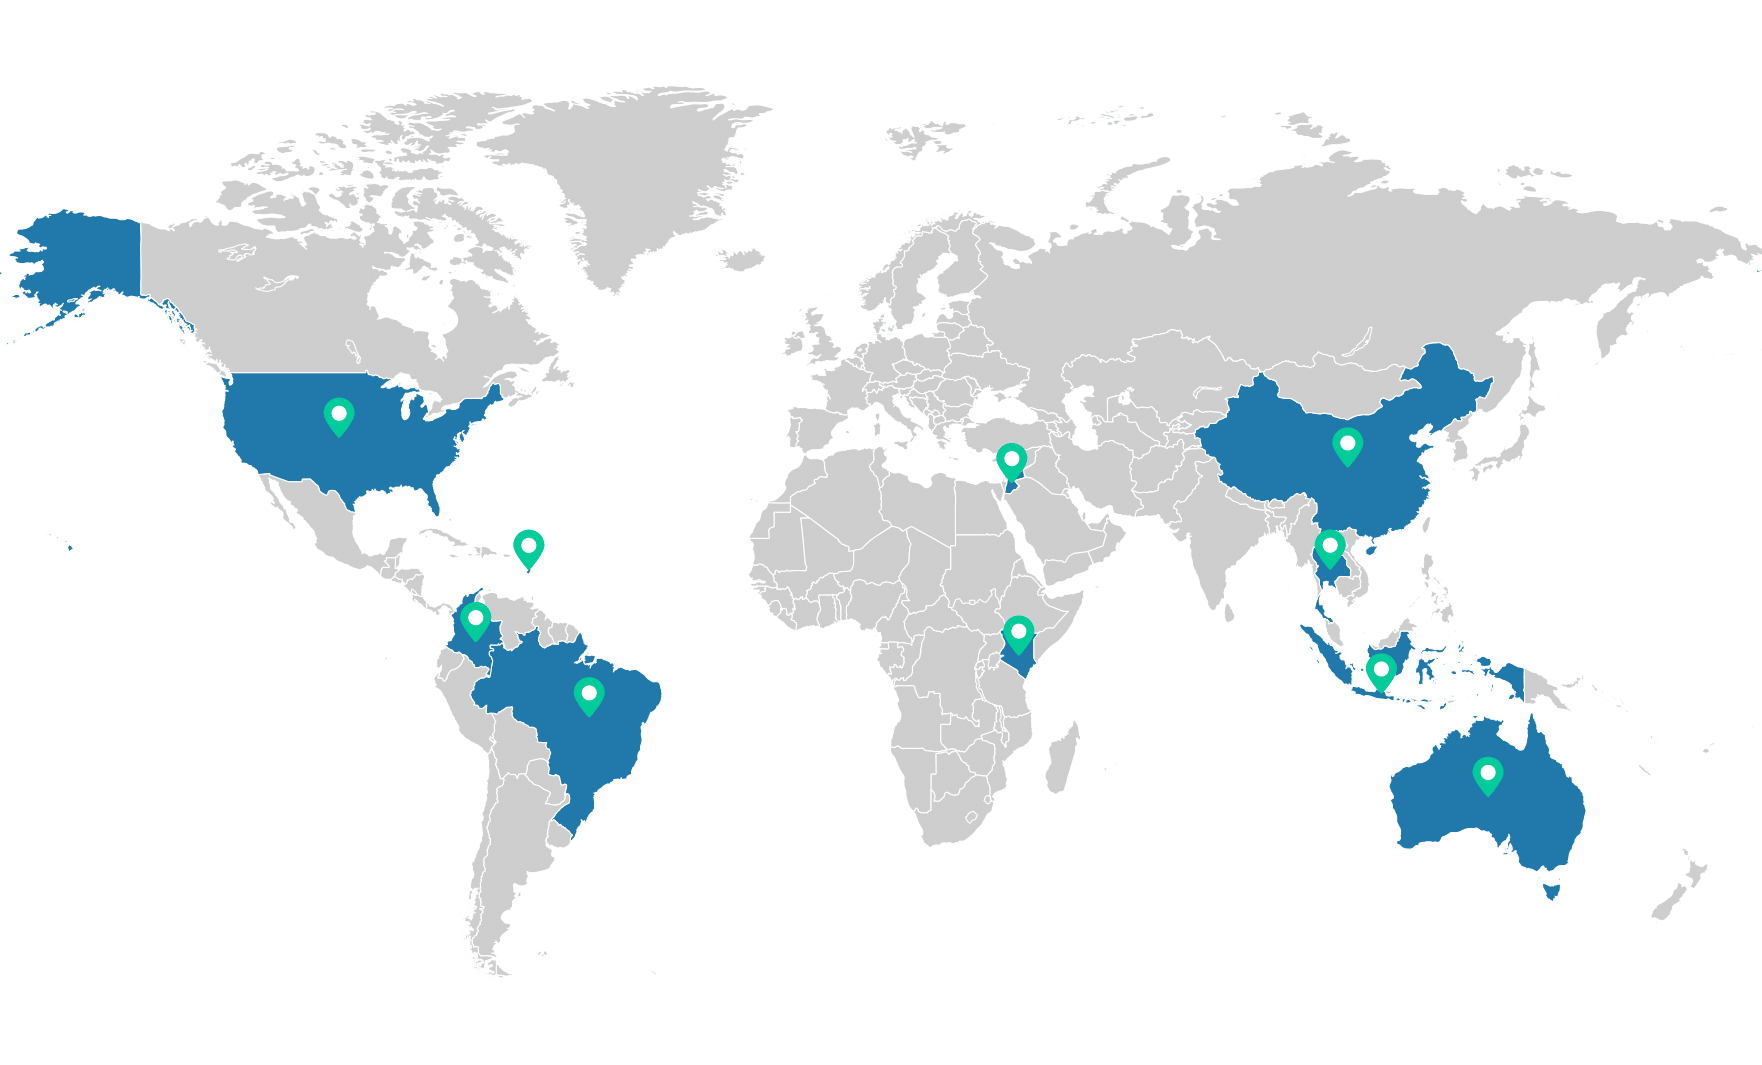 Ten countries provide case studies that highlight examples of policies enabling the implementation of NbS either through legislation or by providing funds. By creating a database of NbS policies from all over the world, this data set can act as a library of possible action items for other actors to discover.